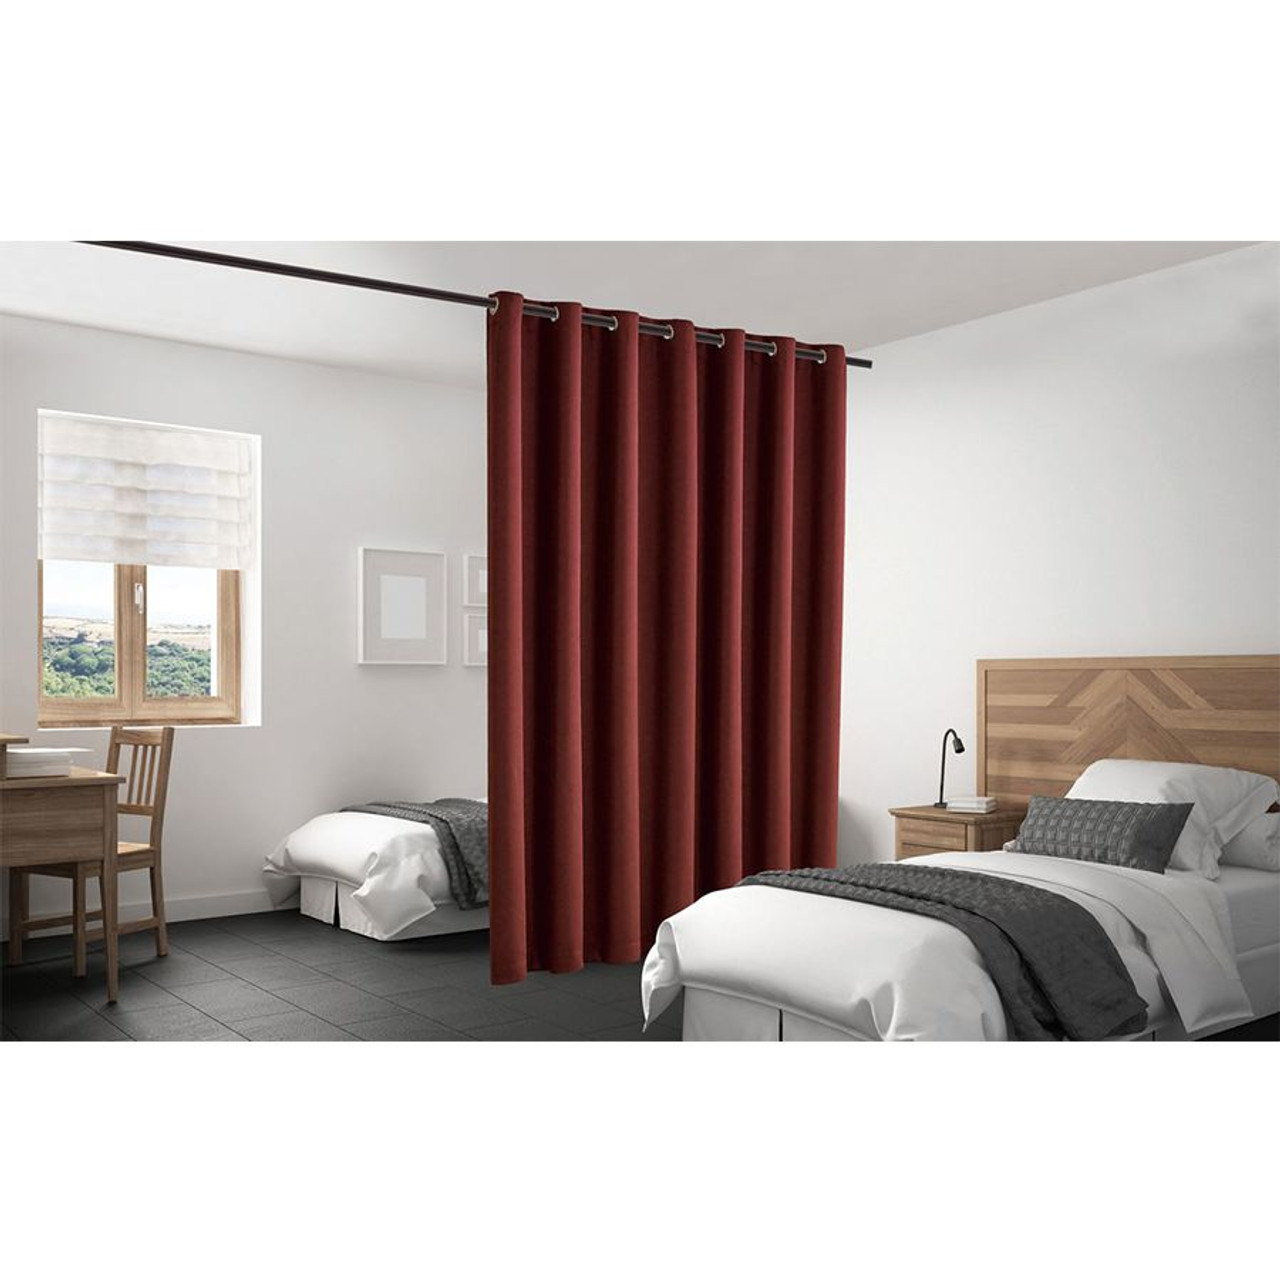 Blackout Room Divider Curtain Panel Thermal Insulated  Burgundy Color